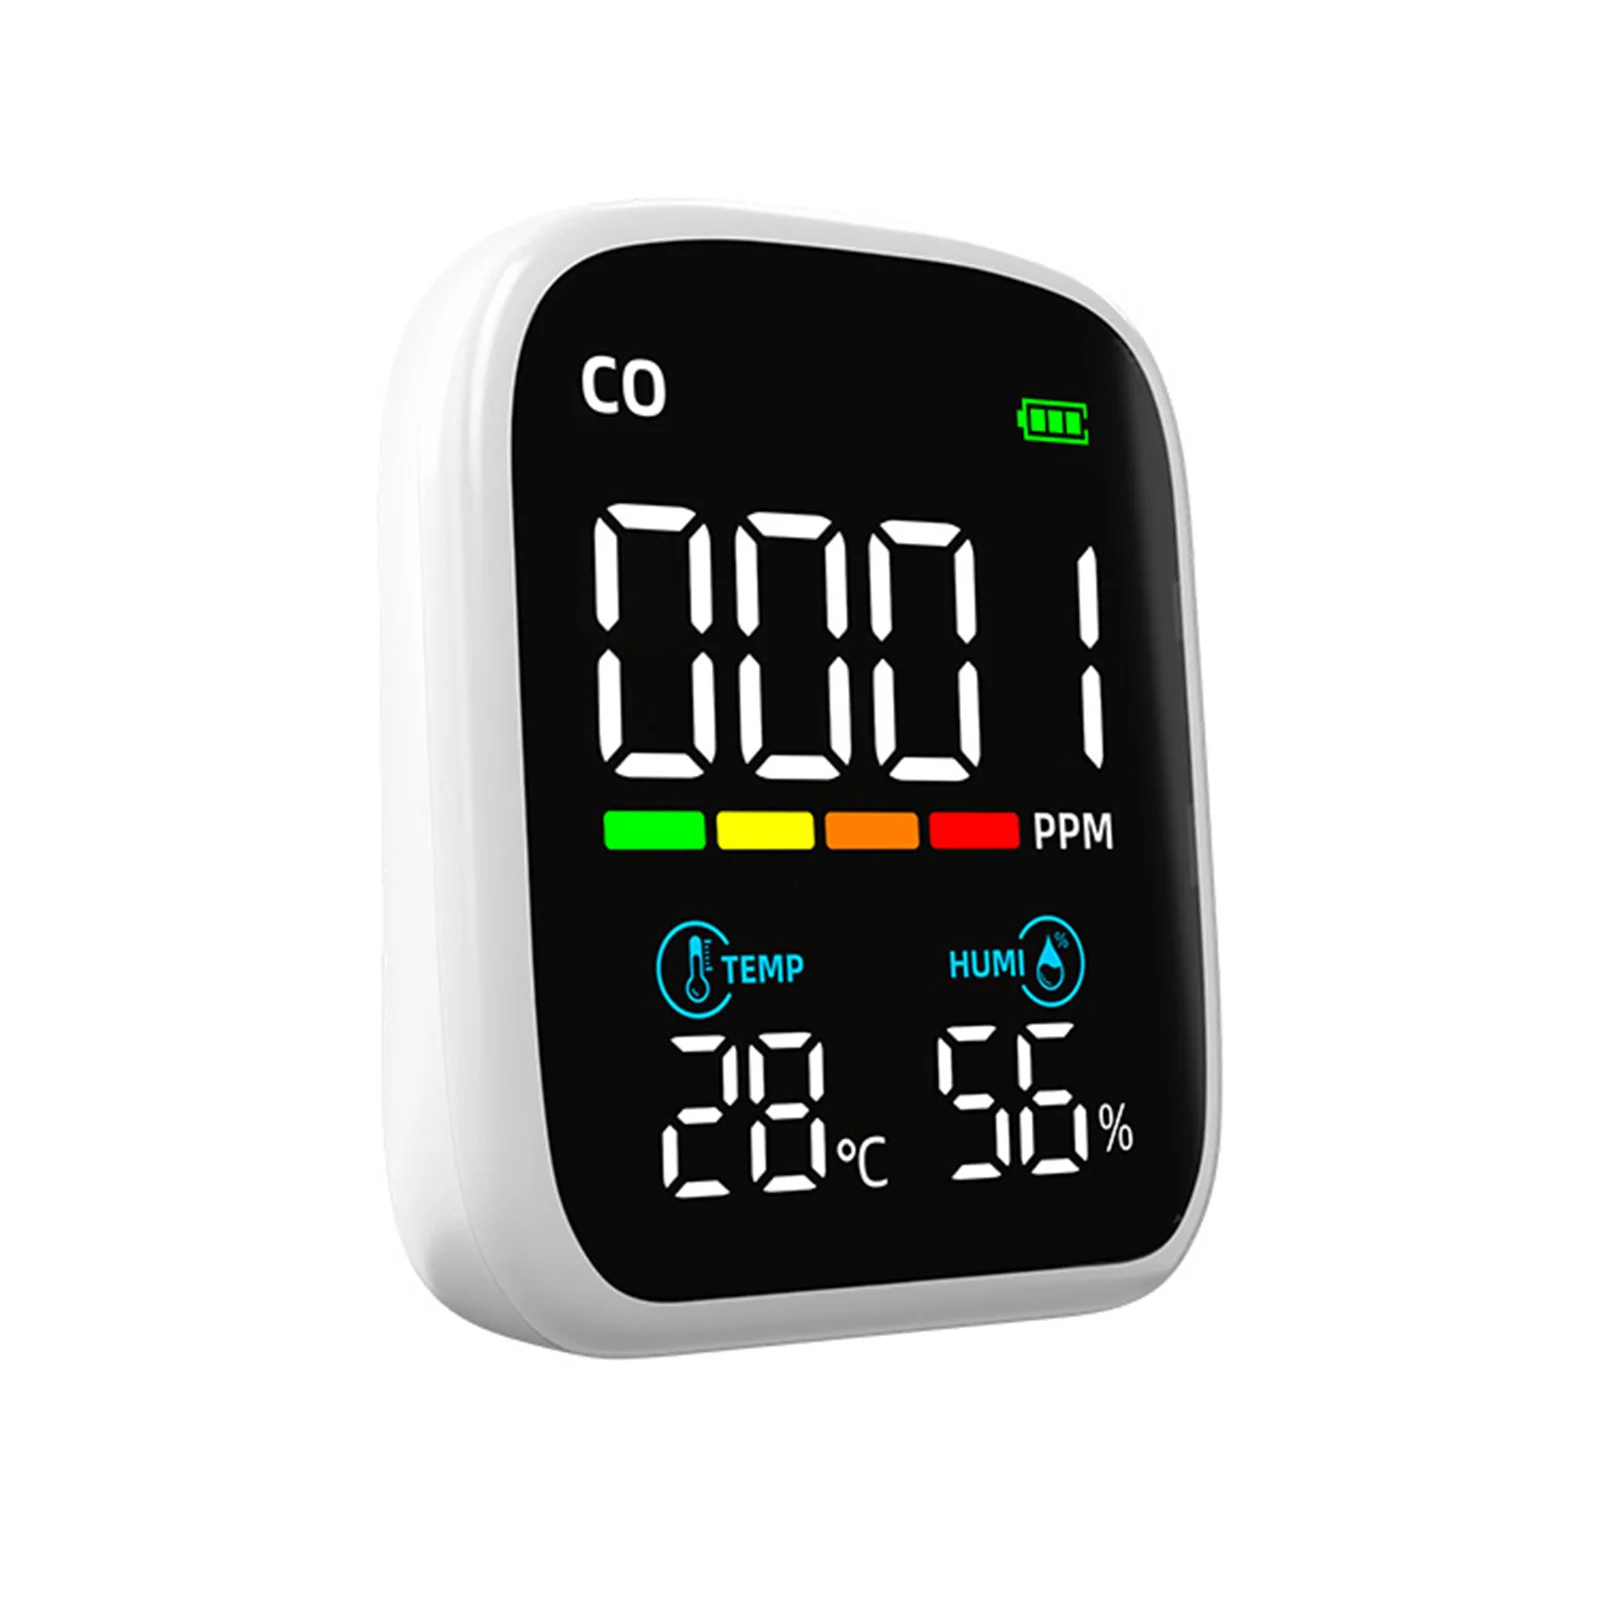 

Portable CO Monitor 3 In 1 Carbon Monoxide Temperature and Humidity Detector Air Quality Meter for Home/Outdoor Camping/Garage